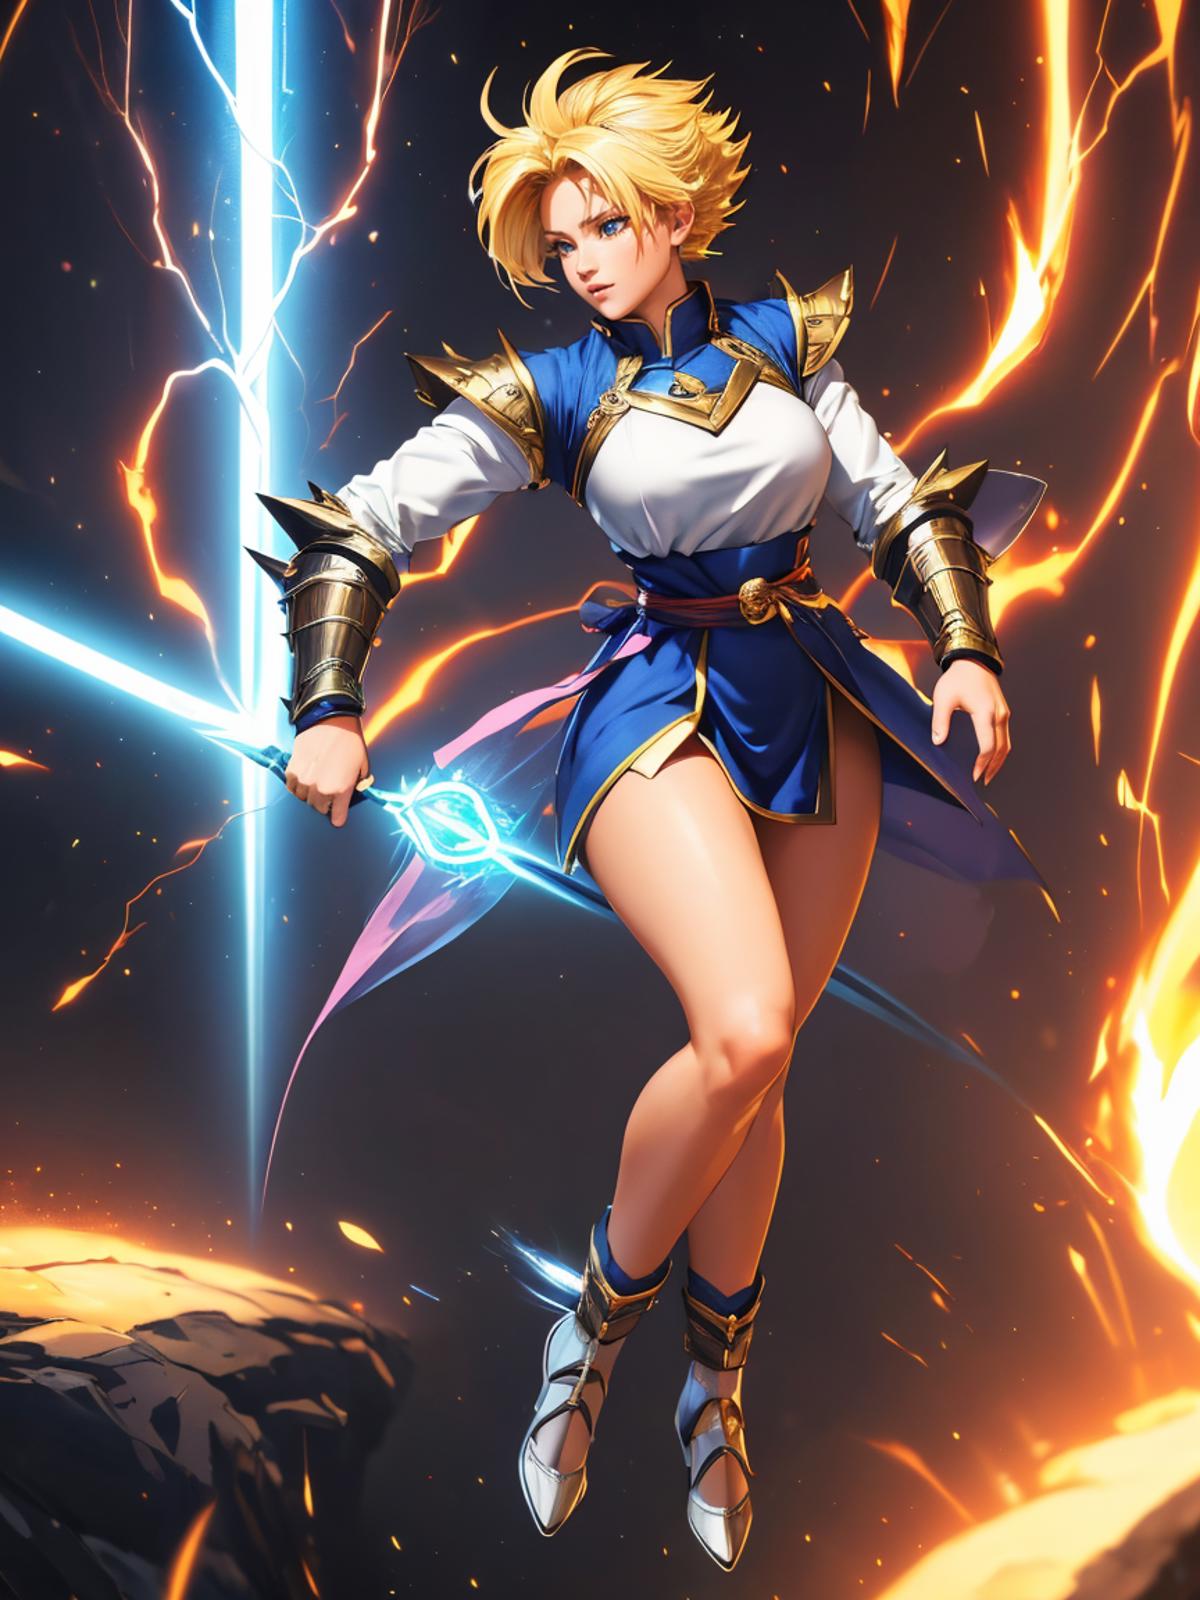 A 3D animated image of a woman in blue and white, holding a sword and standing on one foot.